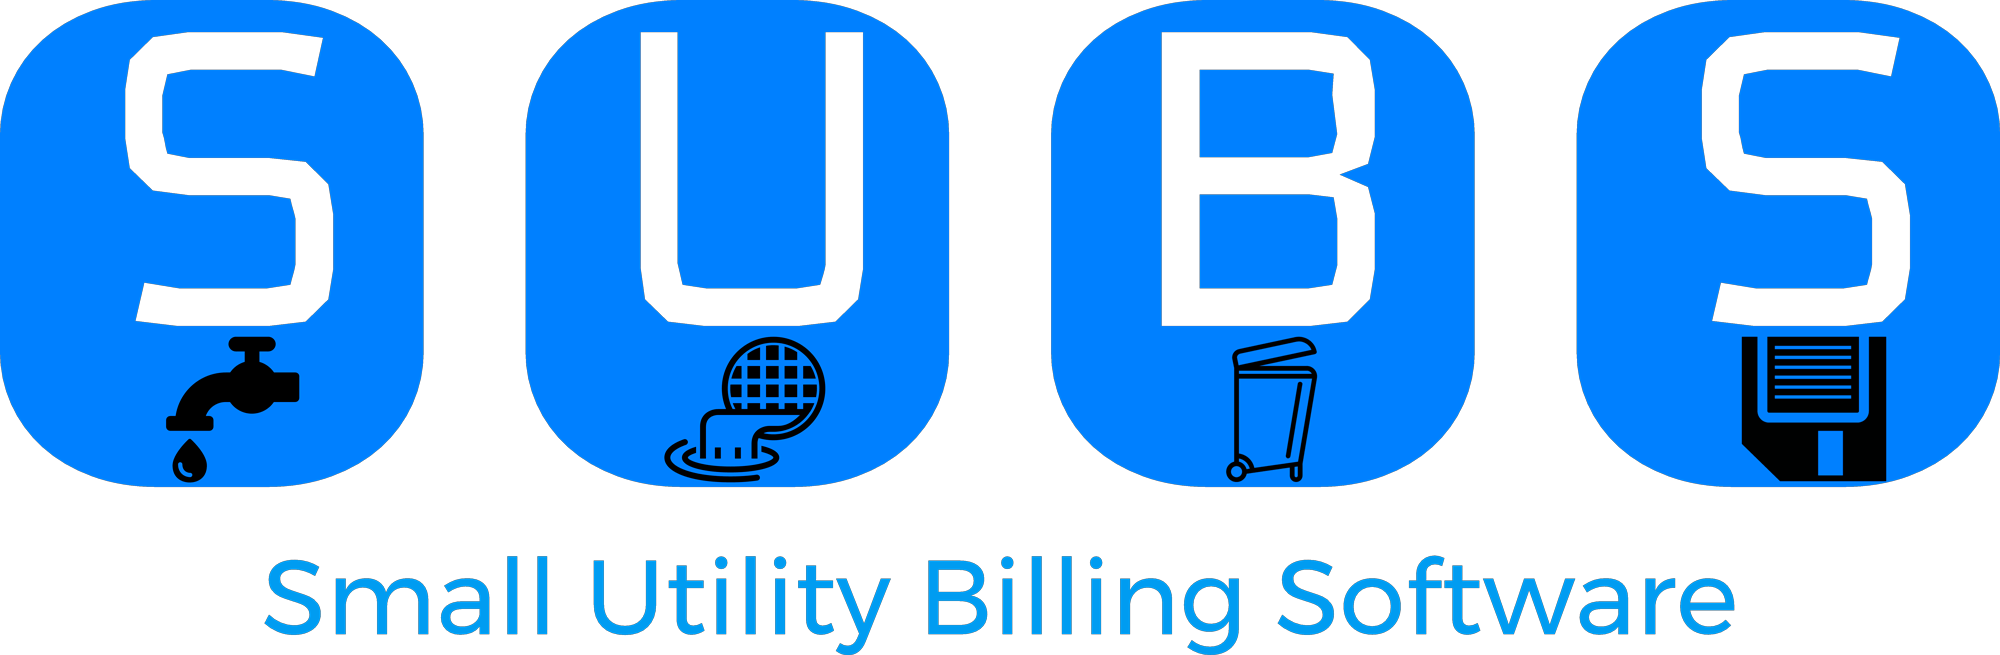 Small Utility Billing Software SUBS logo